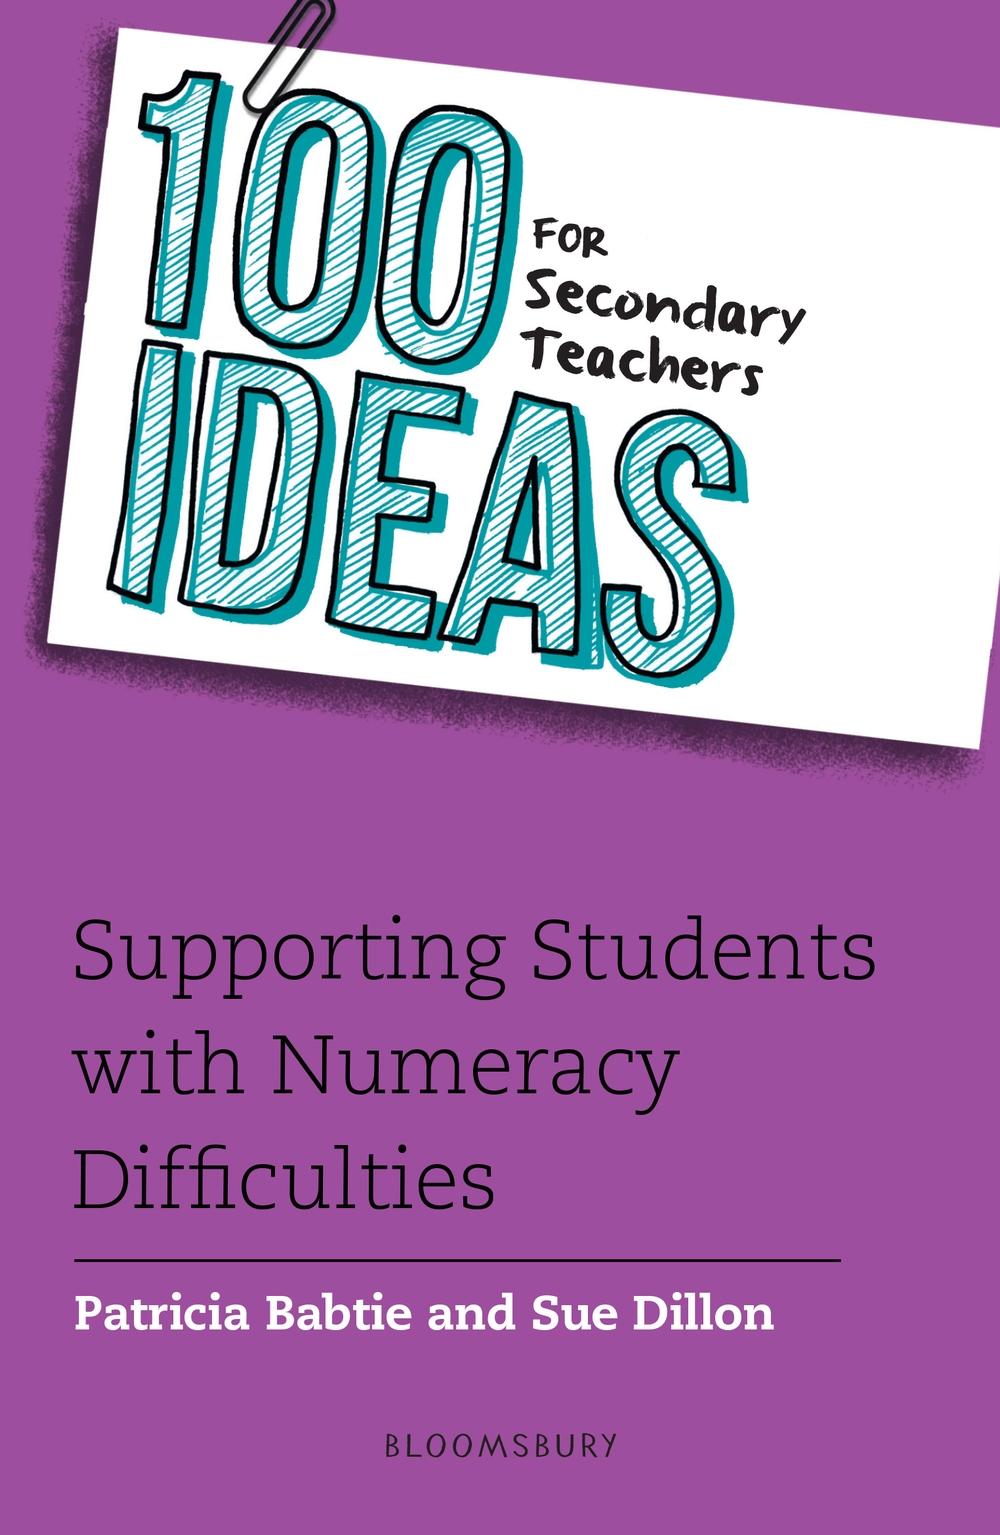 100 Ideas for Secondary Teachers: Supporting Students with N - Patricia Sue Babtie Dillon